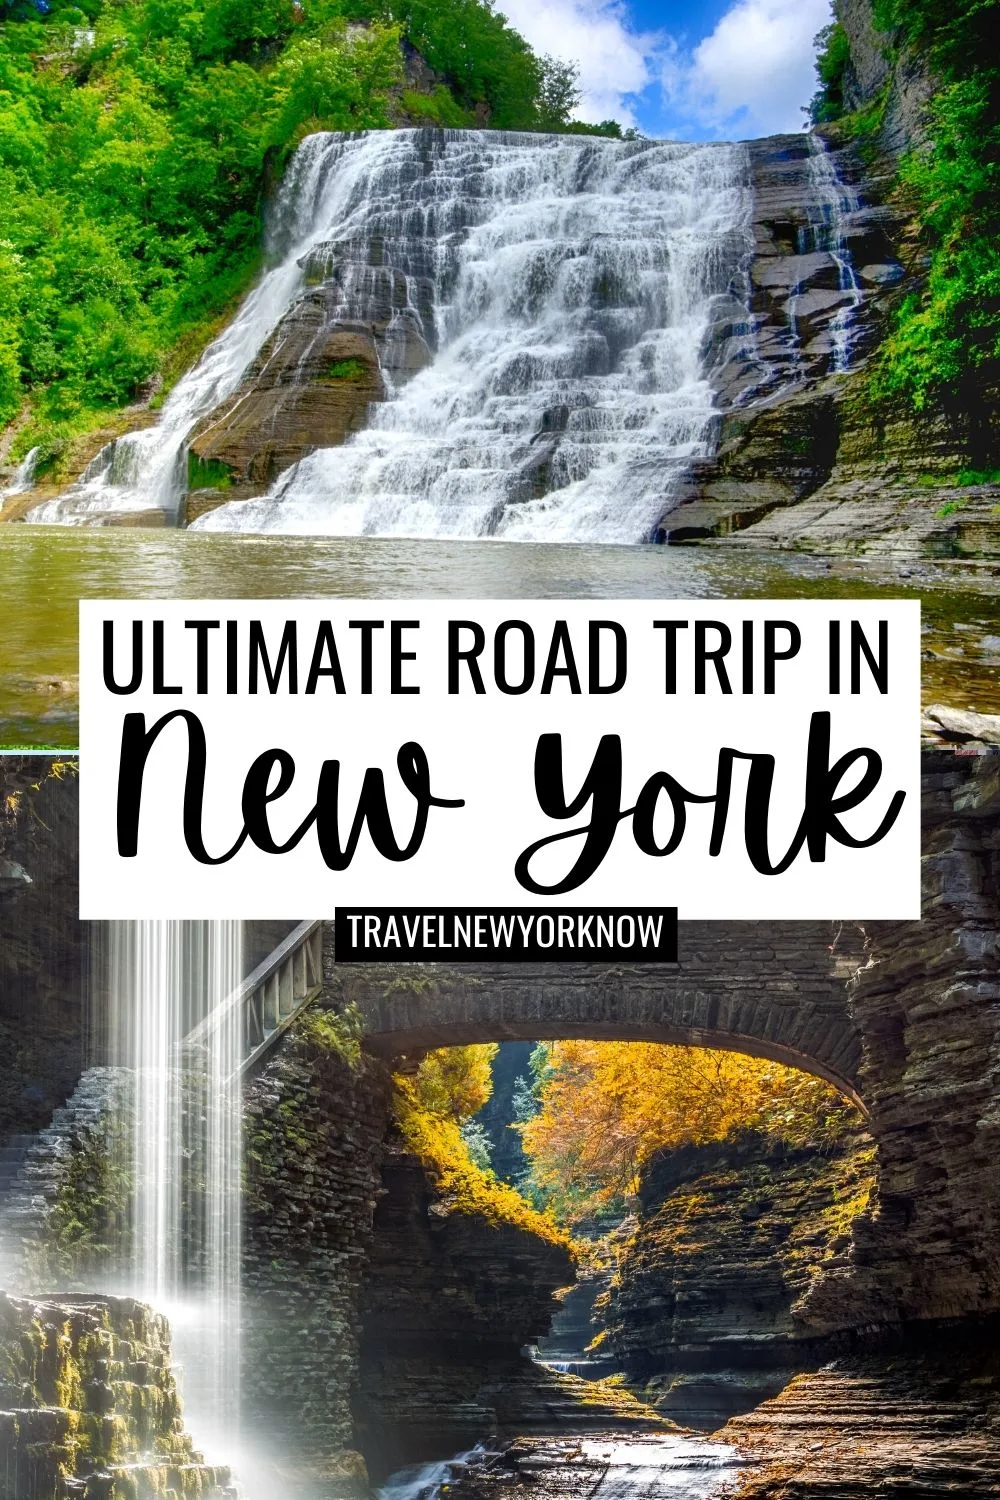 Best New York Road Trip Itinerary, New York Itinerary, New York Travel Tips, New York Travel Guide, New York Travel Photography, Best Road Trips from NYC, where to go in New York, New York bucket list, NY road trip itinerary, Best New York Road Trips. 